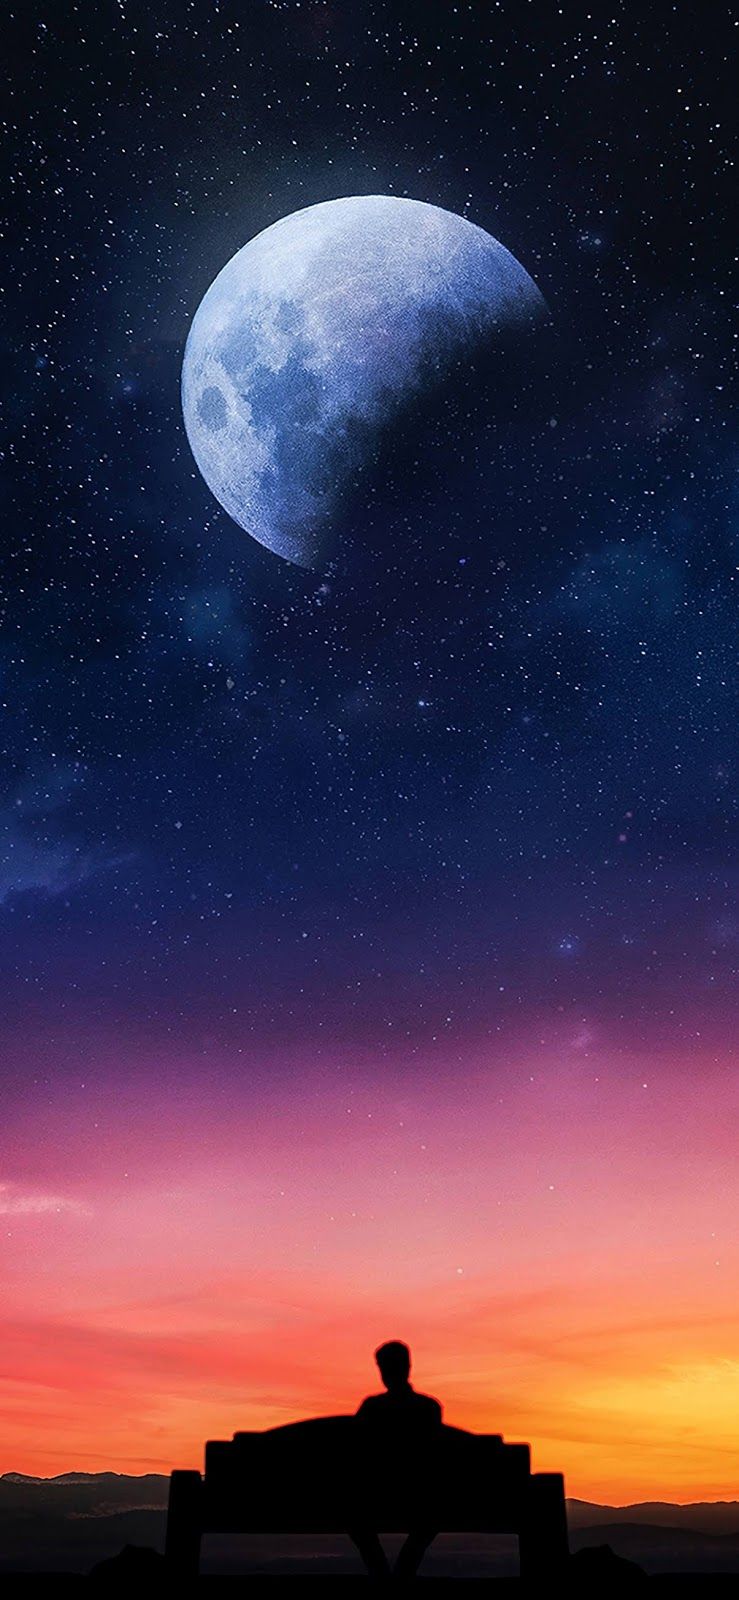 Starry sky iphone xs max background